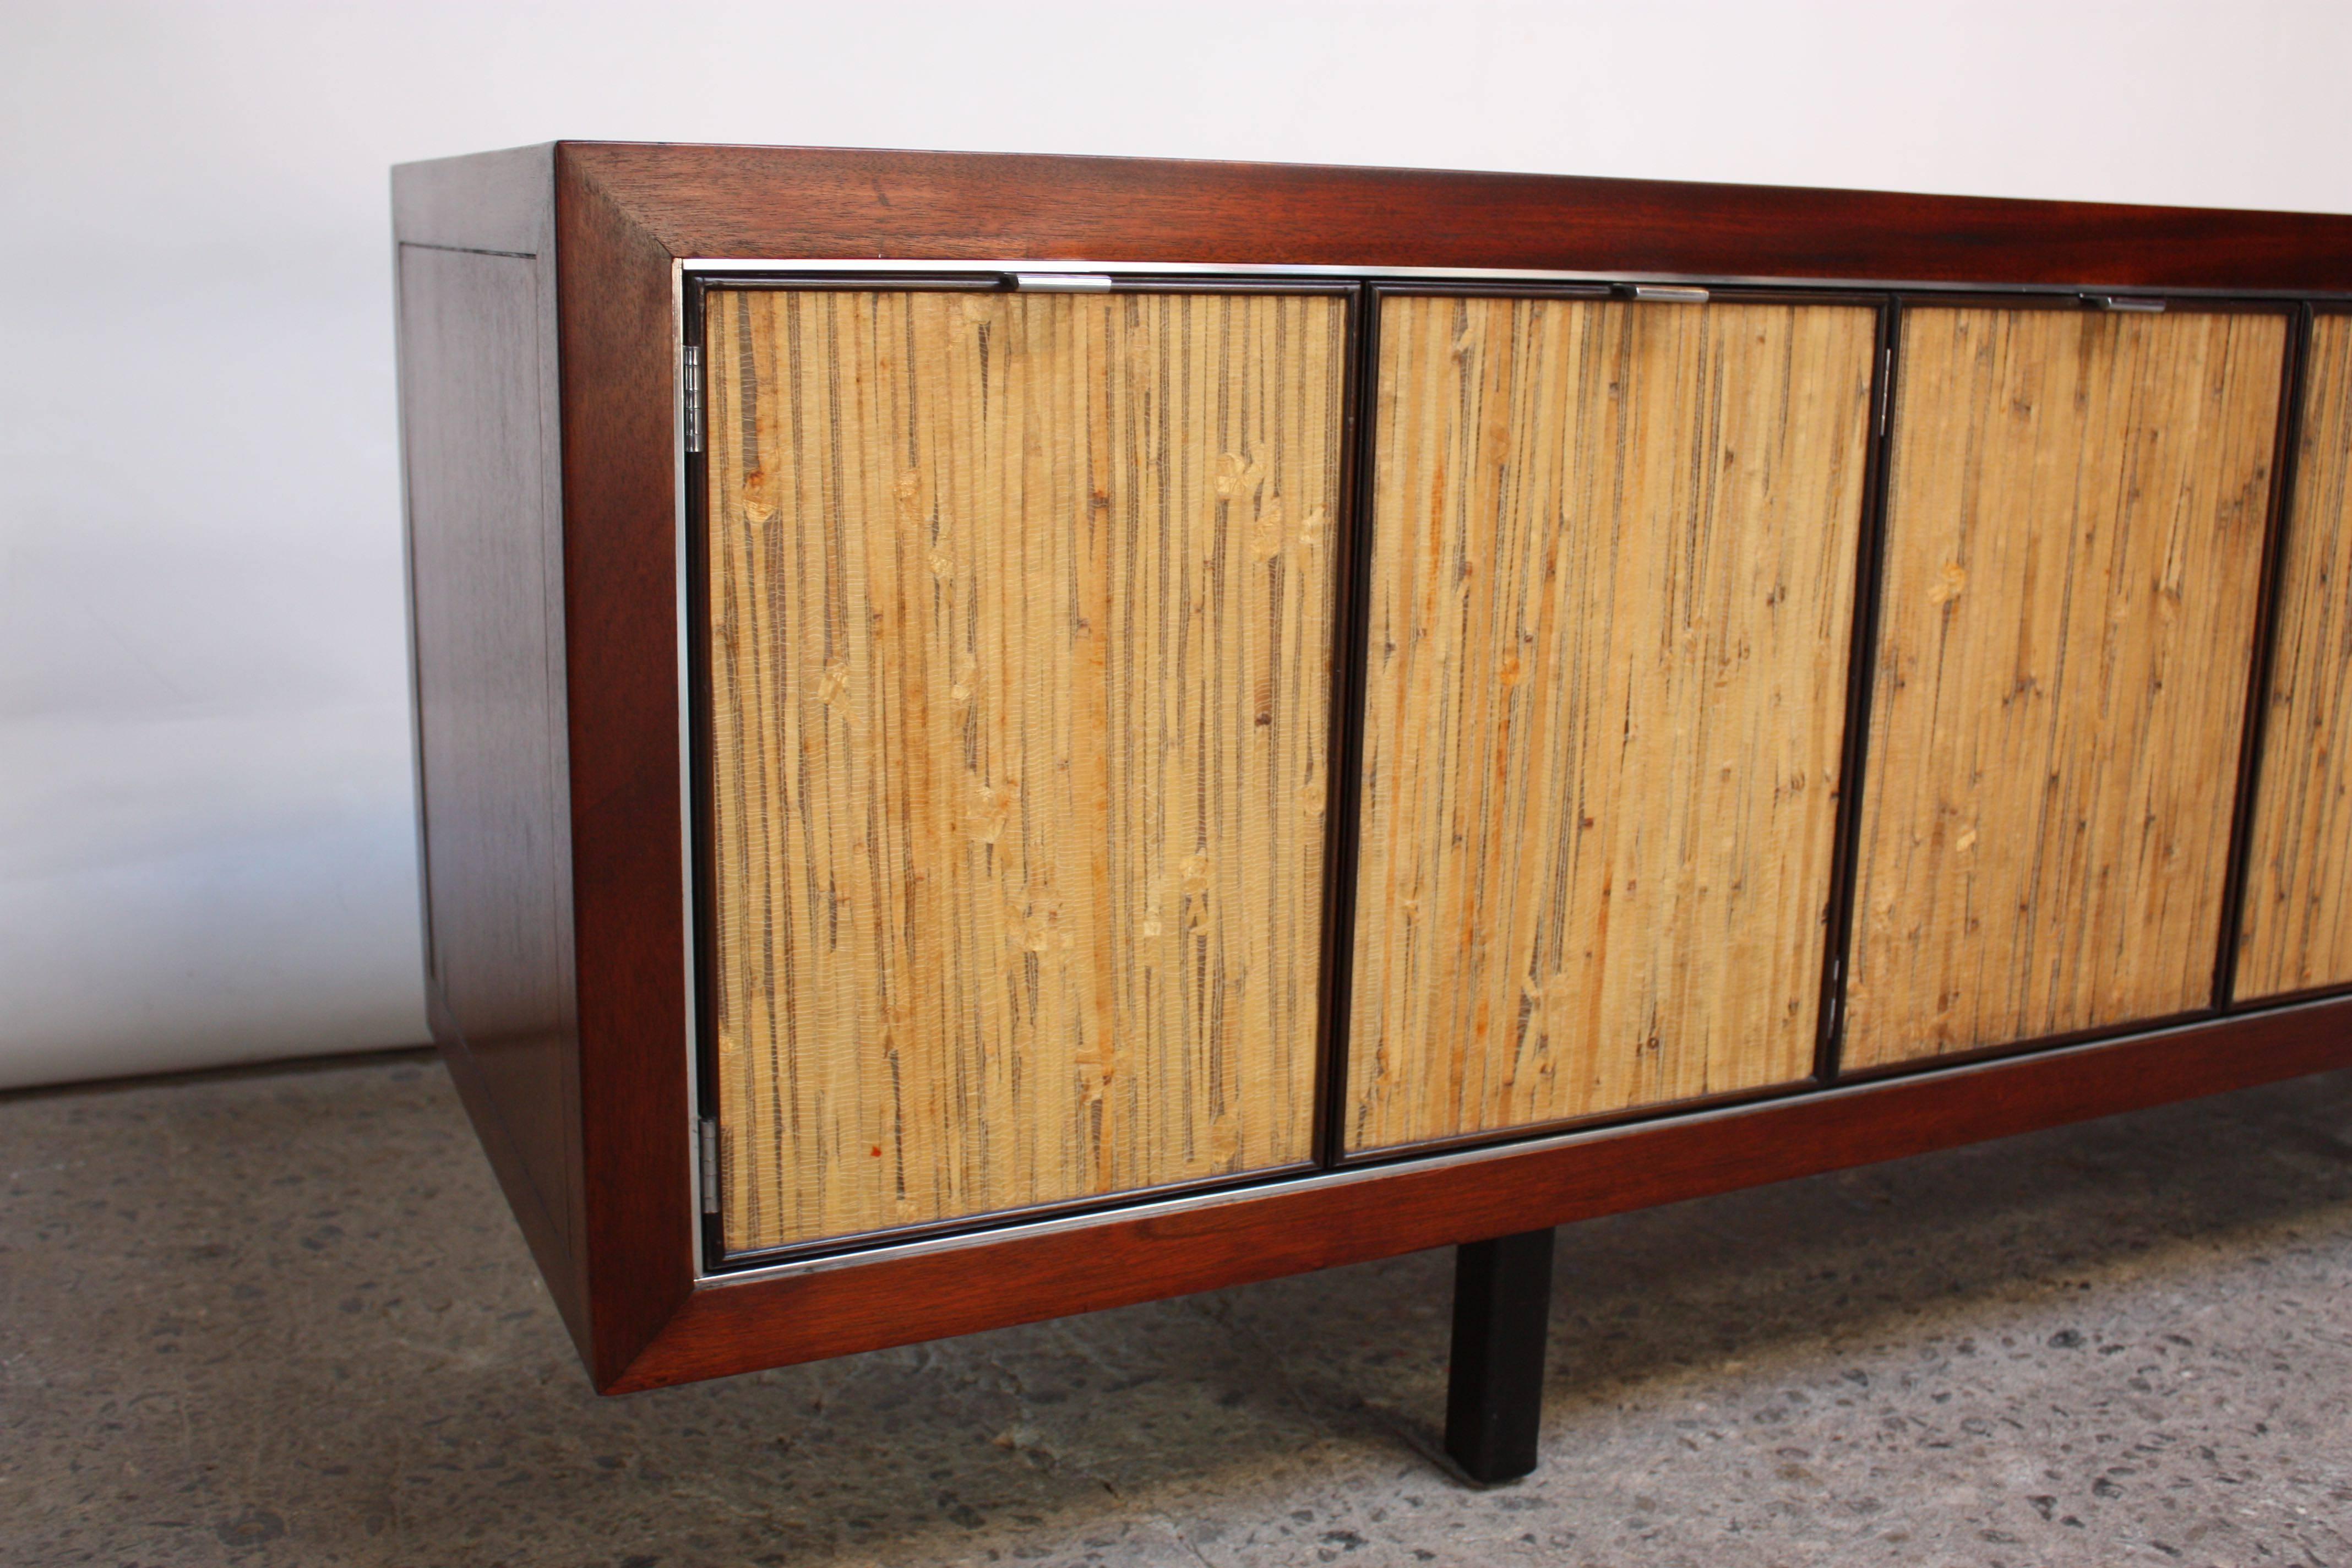 This unique credenza features inlaid bamboo panels on the front on which a clear cast resin has been applied for preservation. The cabinet itself is stained walnut contrasted by a cherry trim and incised with an enamel ebony paint. There are three